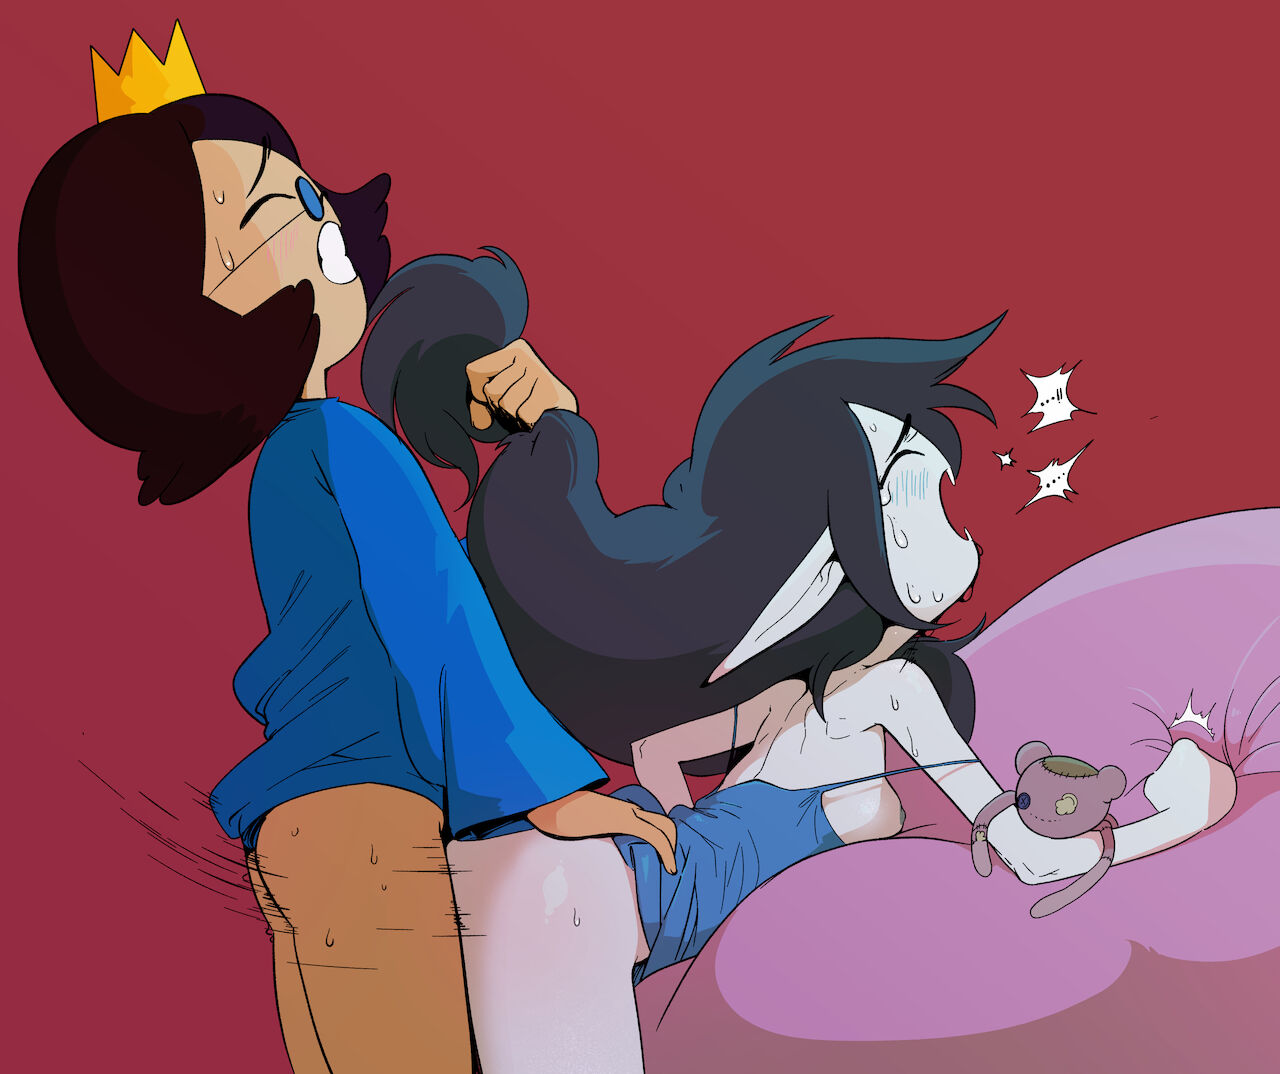 Adventure Time Shemale Porn Comic Melting - Marceline Abadeer - Adventure Time by Yellow Elephant - FreeAdultComix